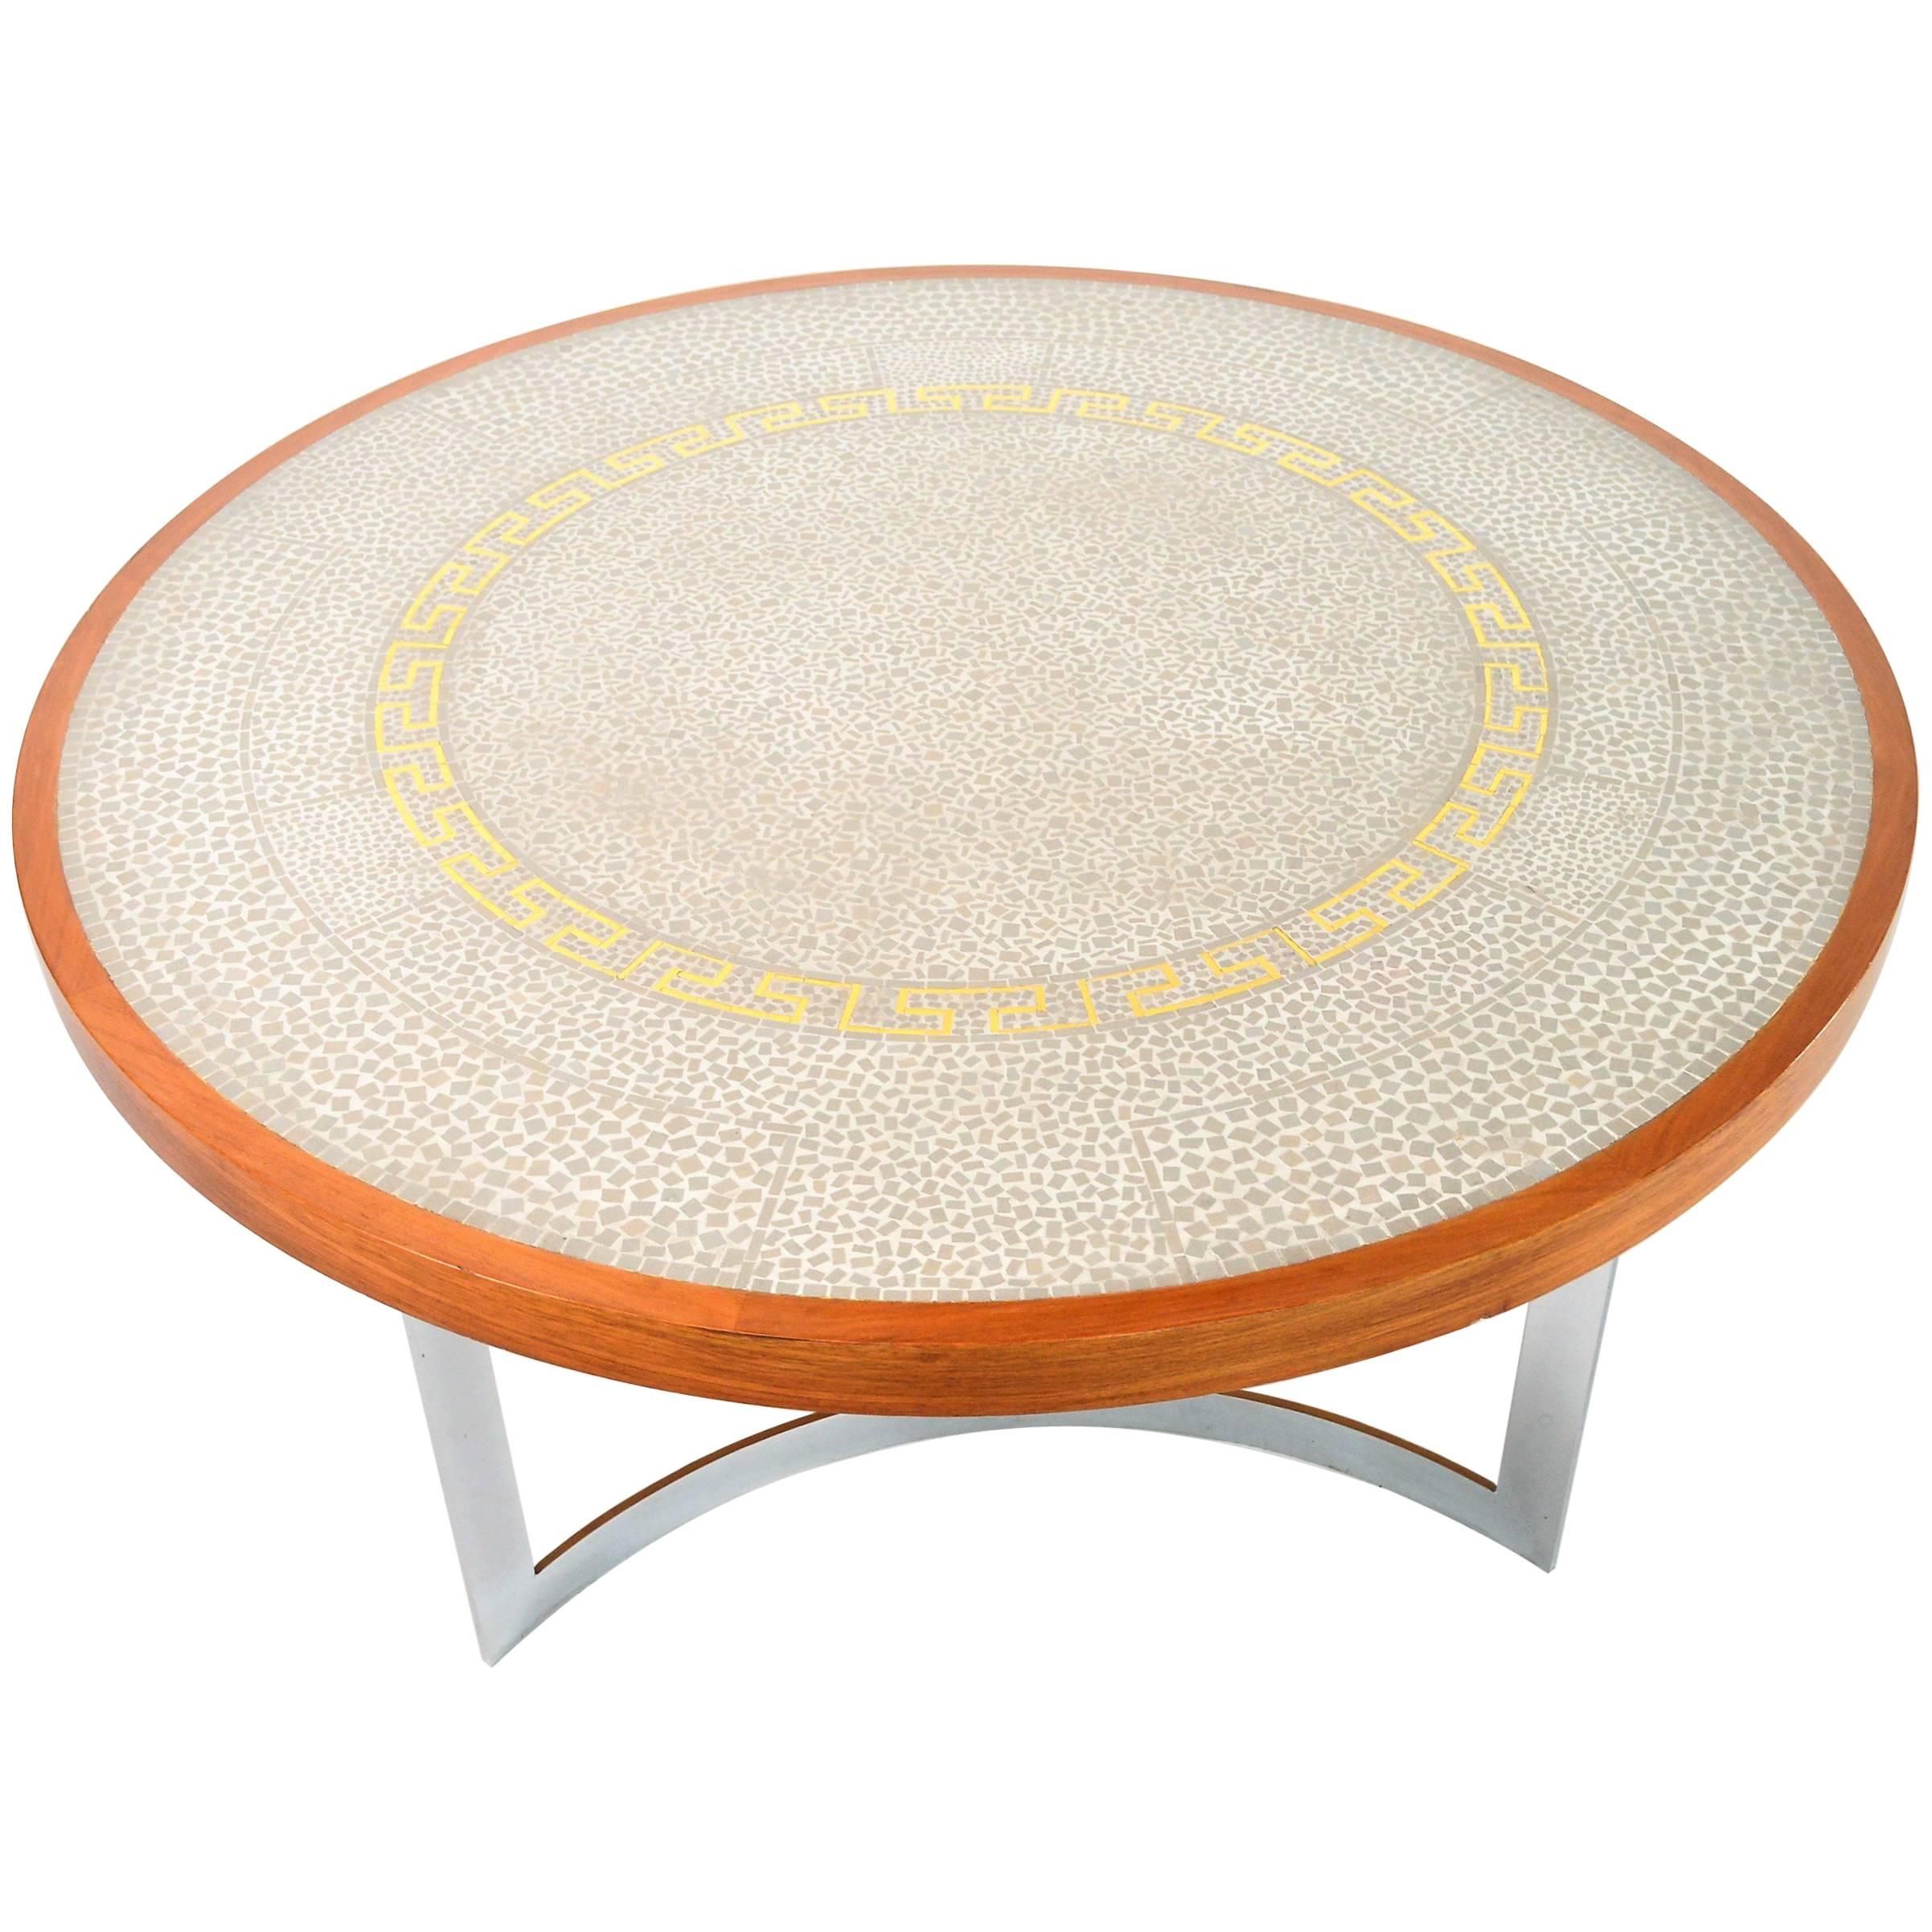 German Round Tile Mosaic and Wood Coffee Table by Berthold Muller , 1960s